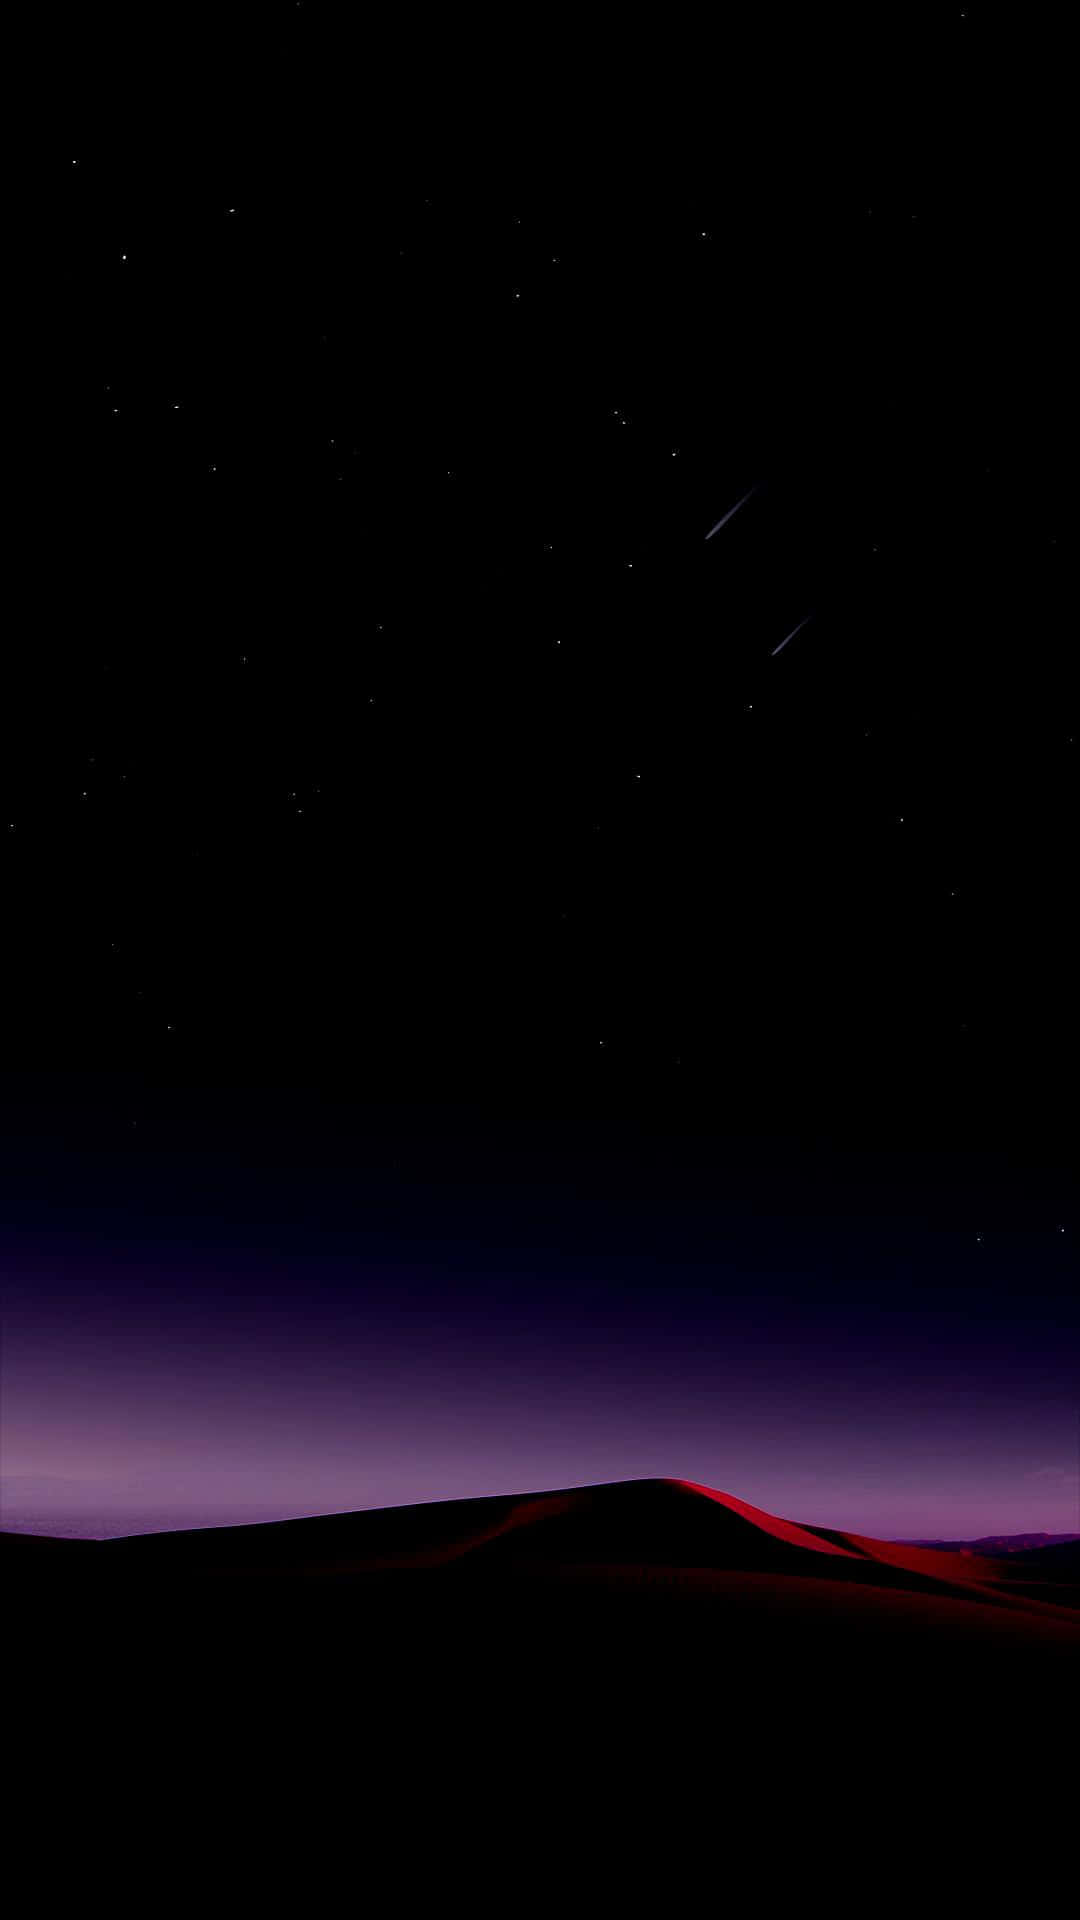 A Night Sky With Stars And A Hill